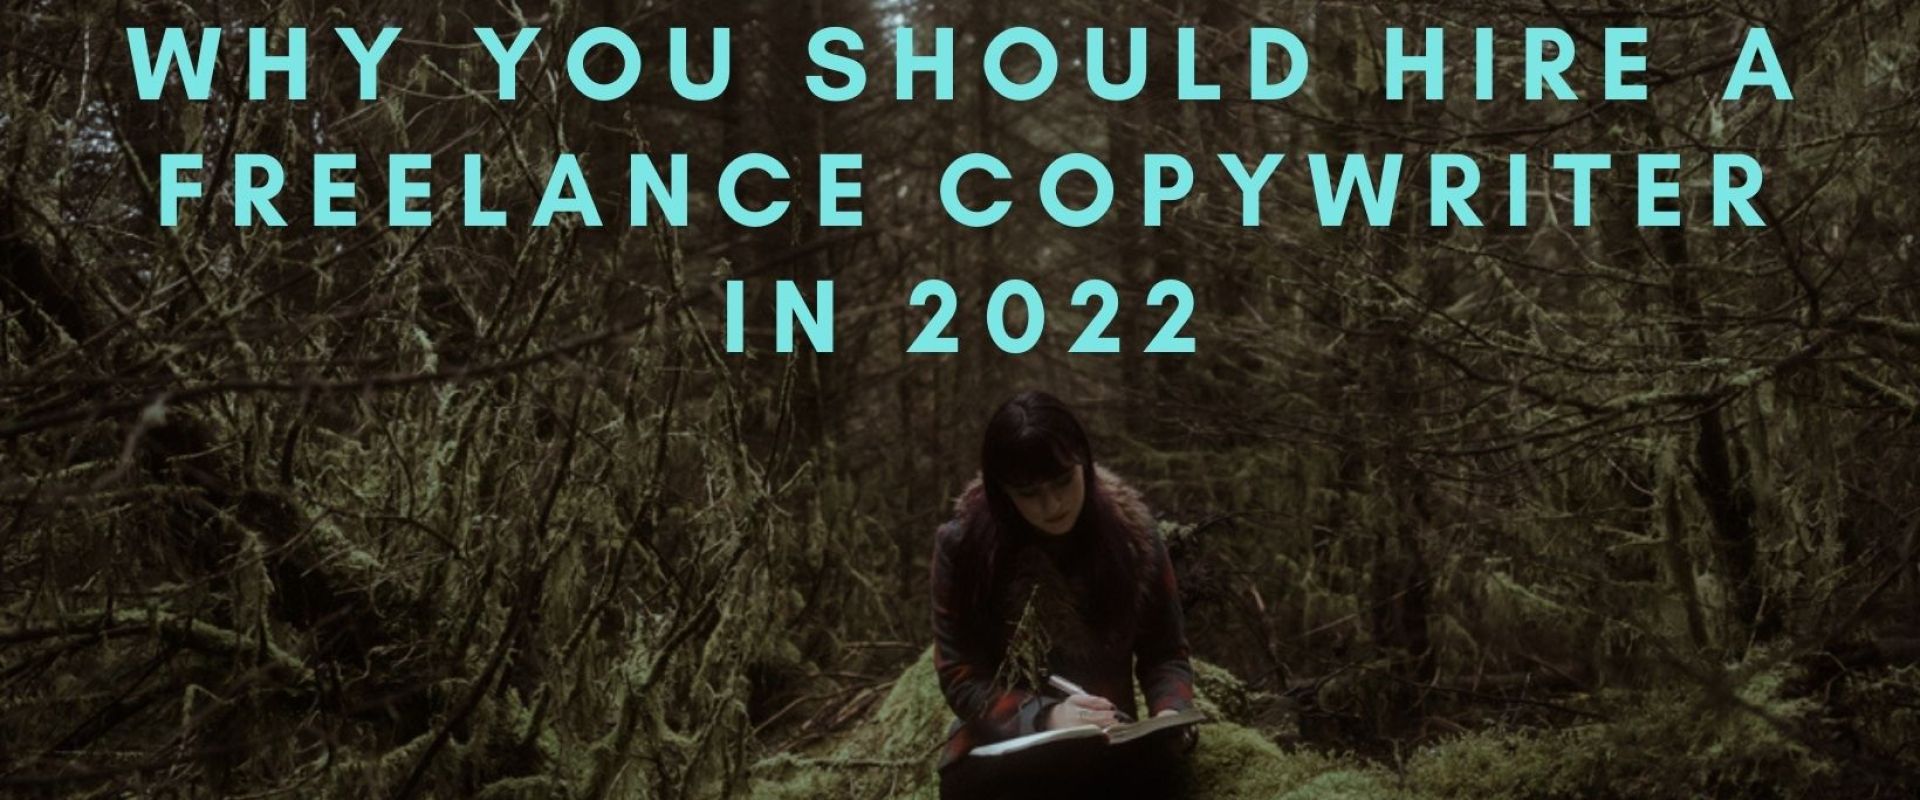 Why you should hire a freelance copywriter in 2022